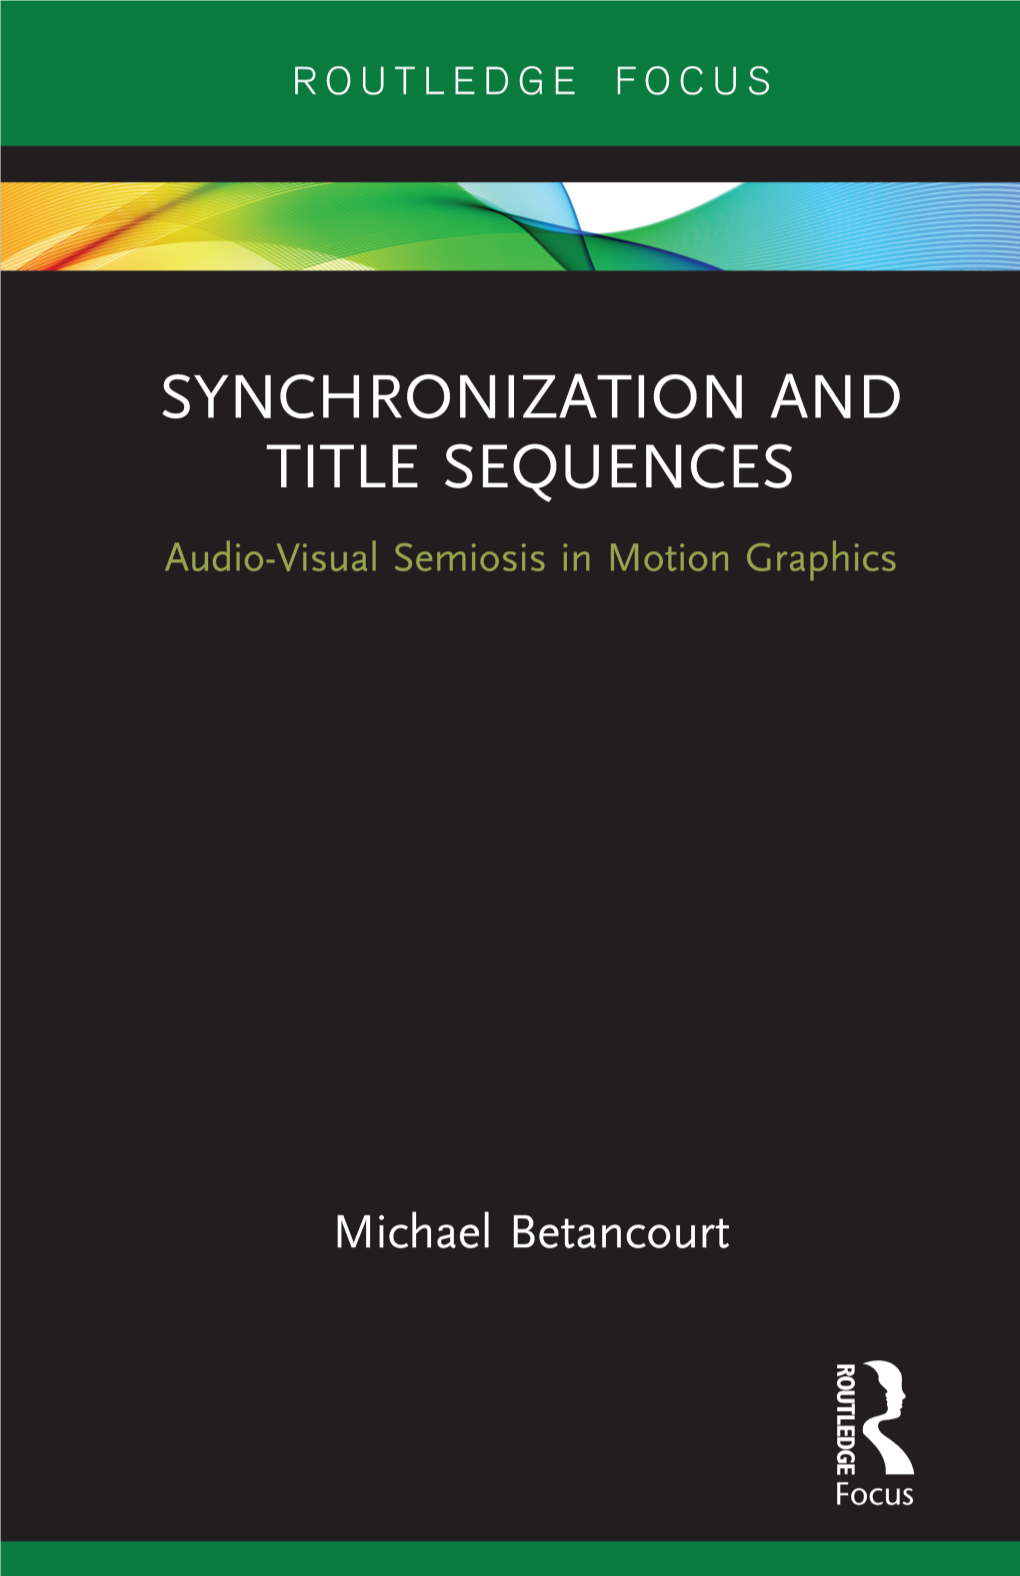 Synchronization and Title Sequences: Audio-Visual Semiosis in Motion